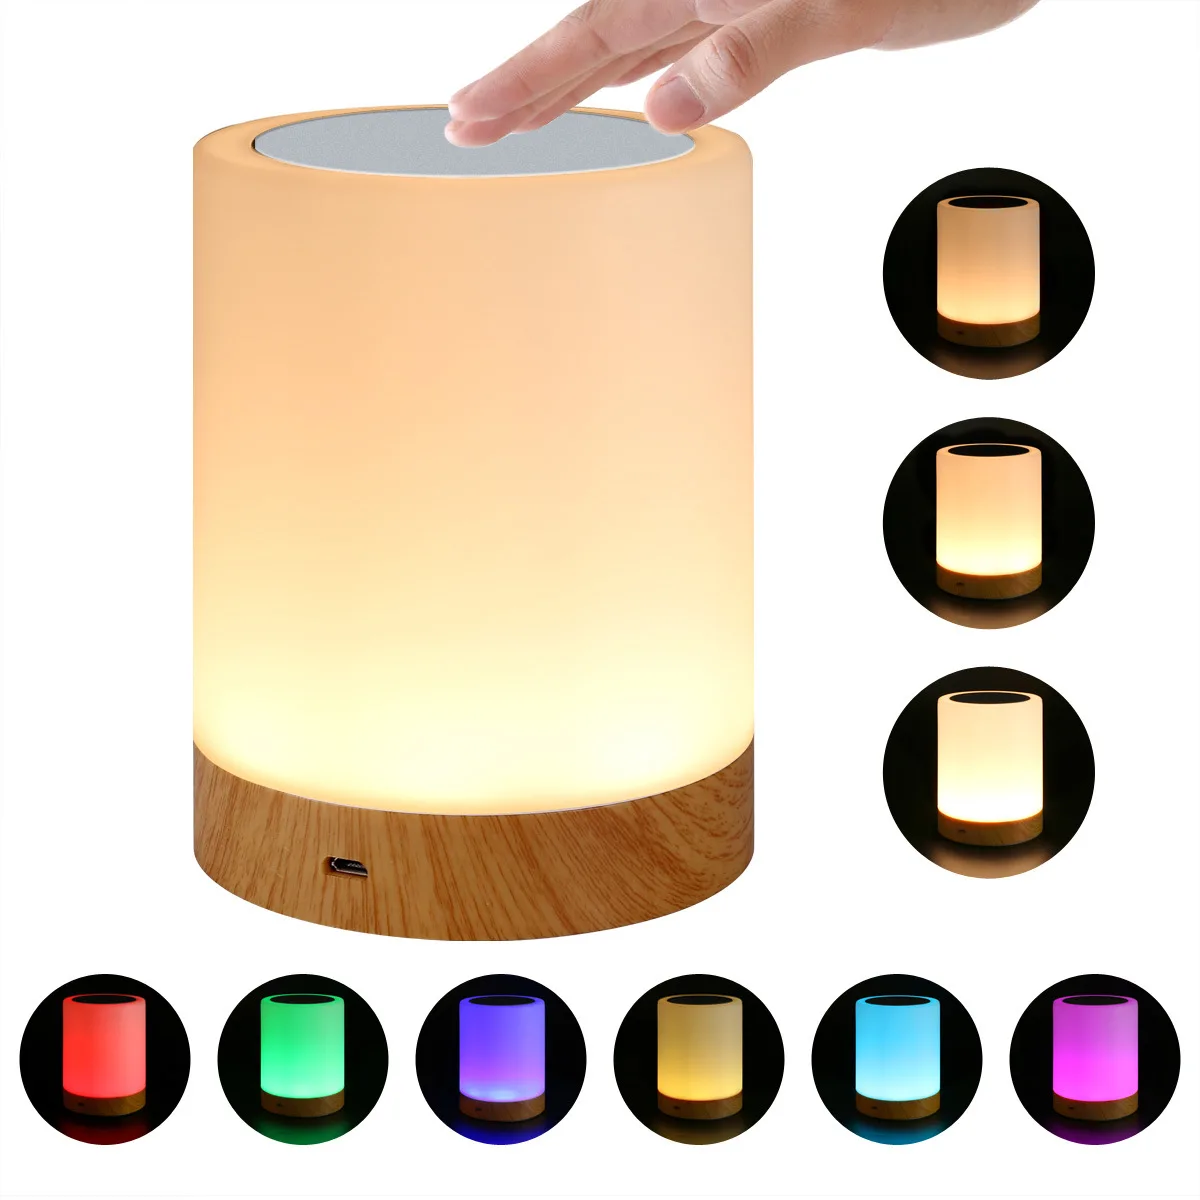 

The new dimmable LED colorful creative wood grain rechargeable night light bedside table lamp atmosphere light touch pat light